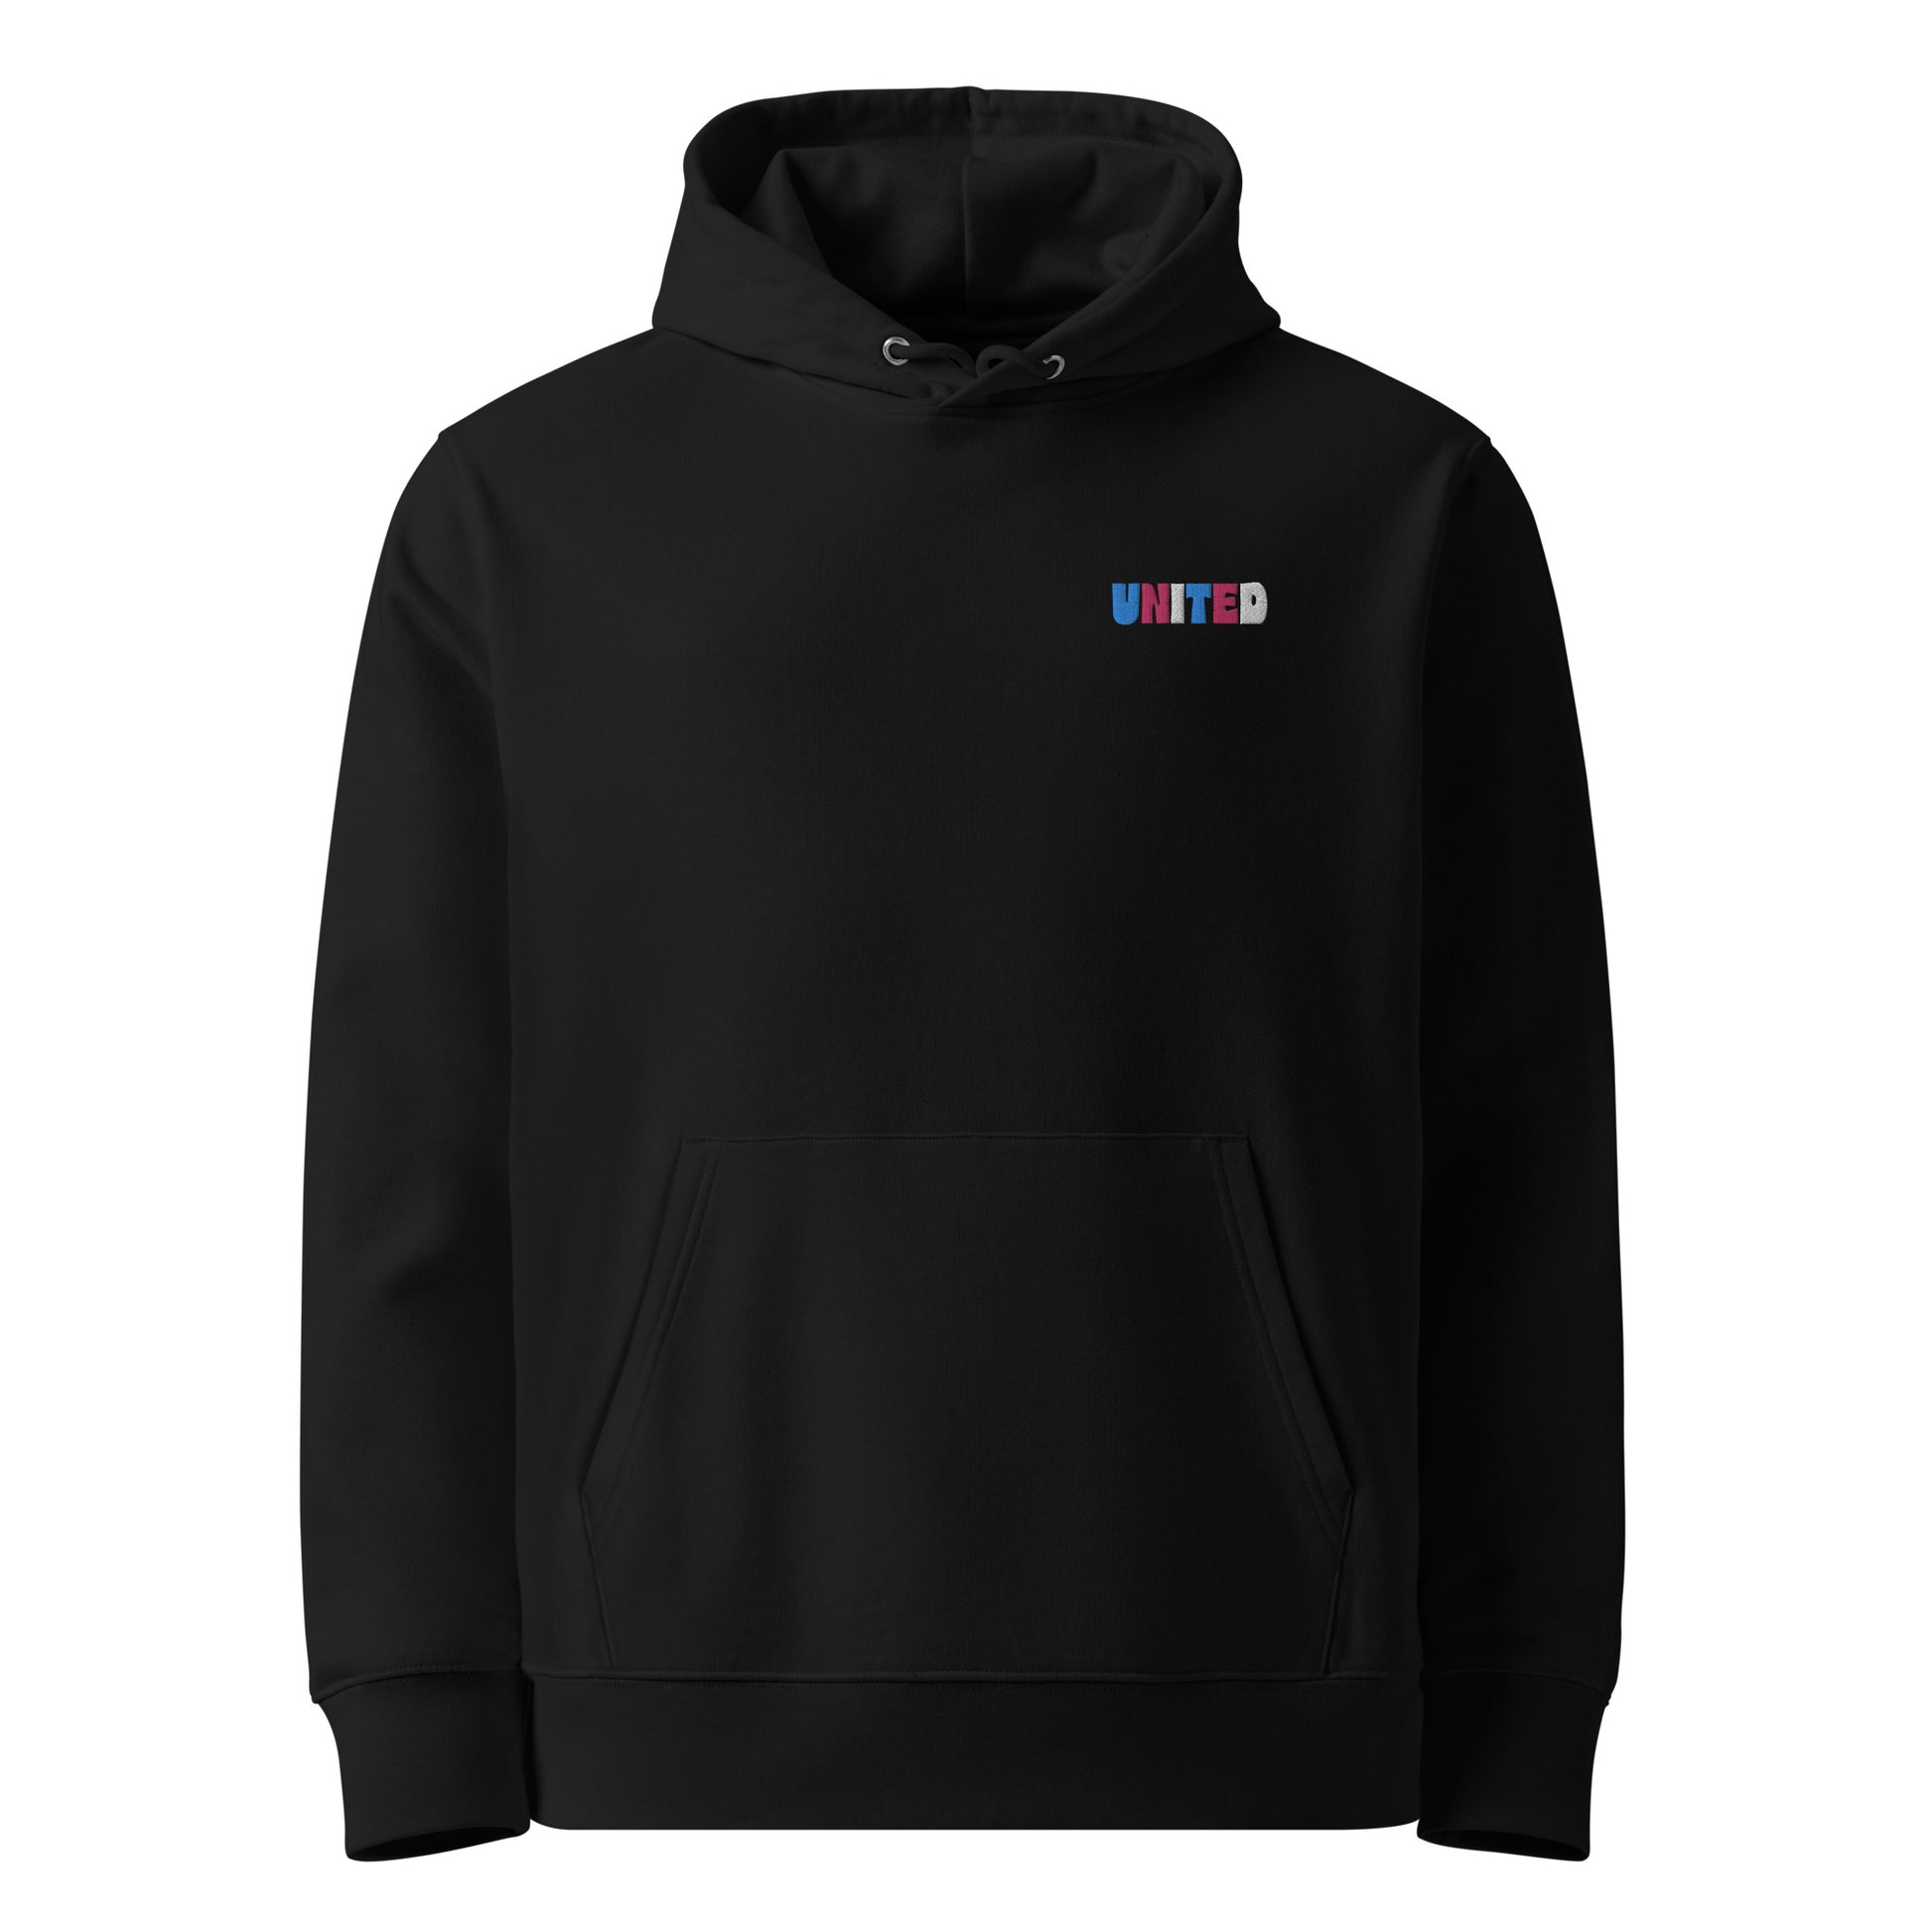 Unisex eco-friendly black hoodie featuring on the upper left chest; united embroidery in transgender pride colors, adding a touch of lgbtq to your outfit. sizes: small, medium, large, extra large, double extra large.